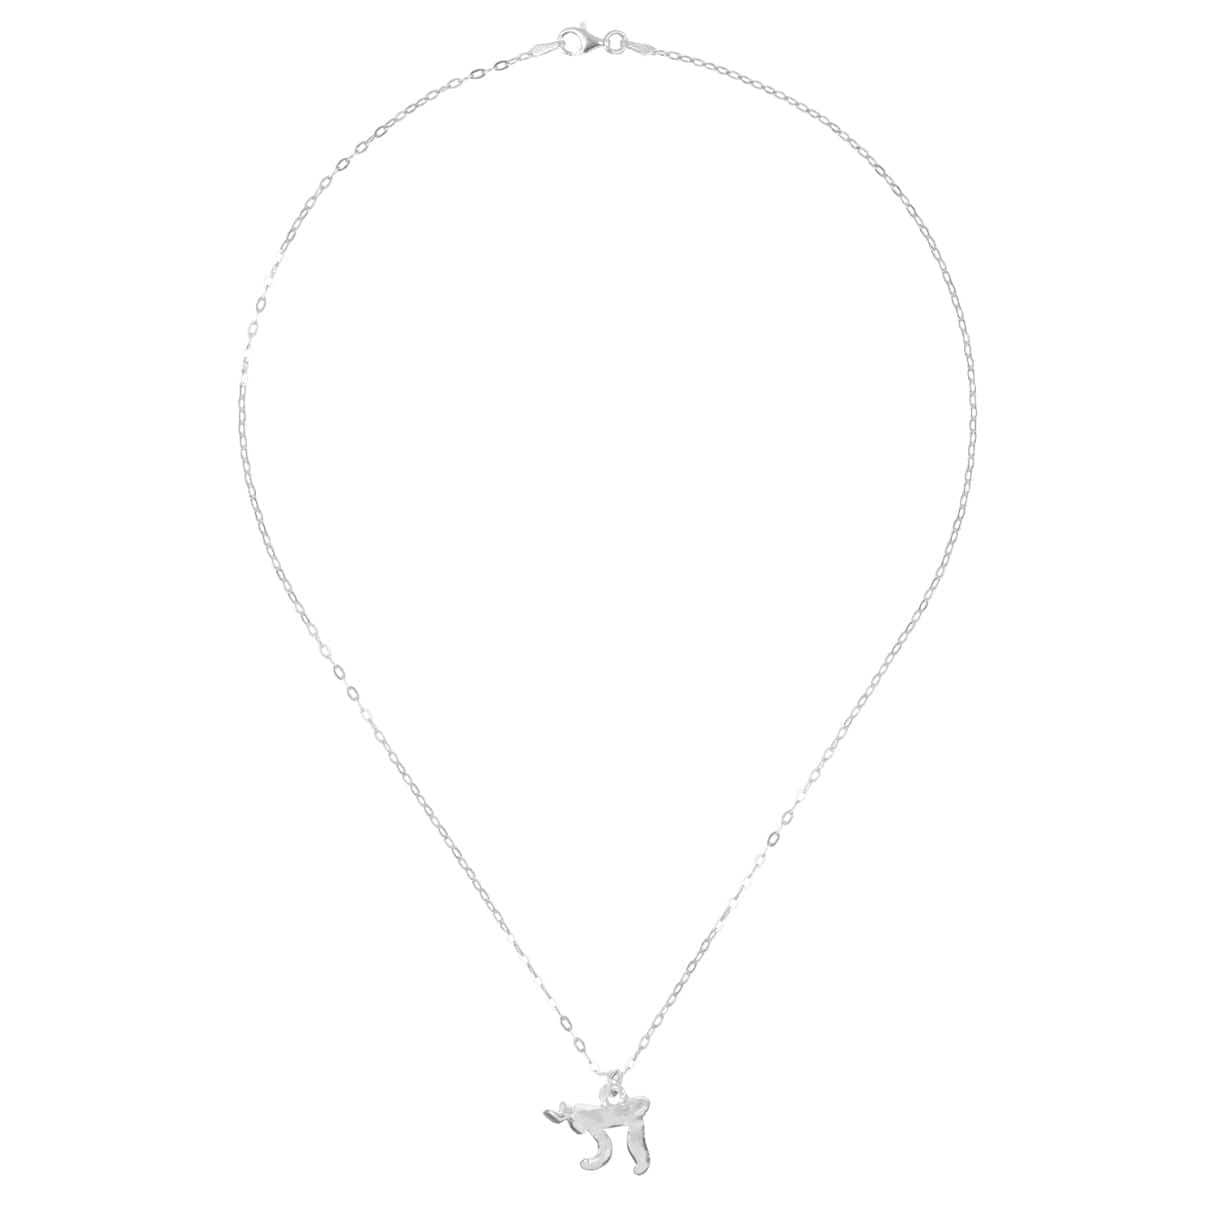 Susan Alexandra Necklaces Chai Necklace by Susan Alexandra - Sterling Silver